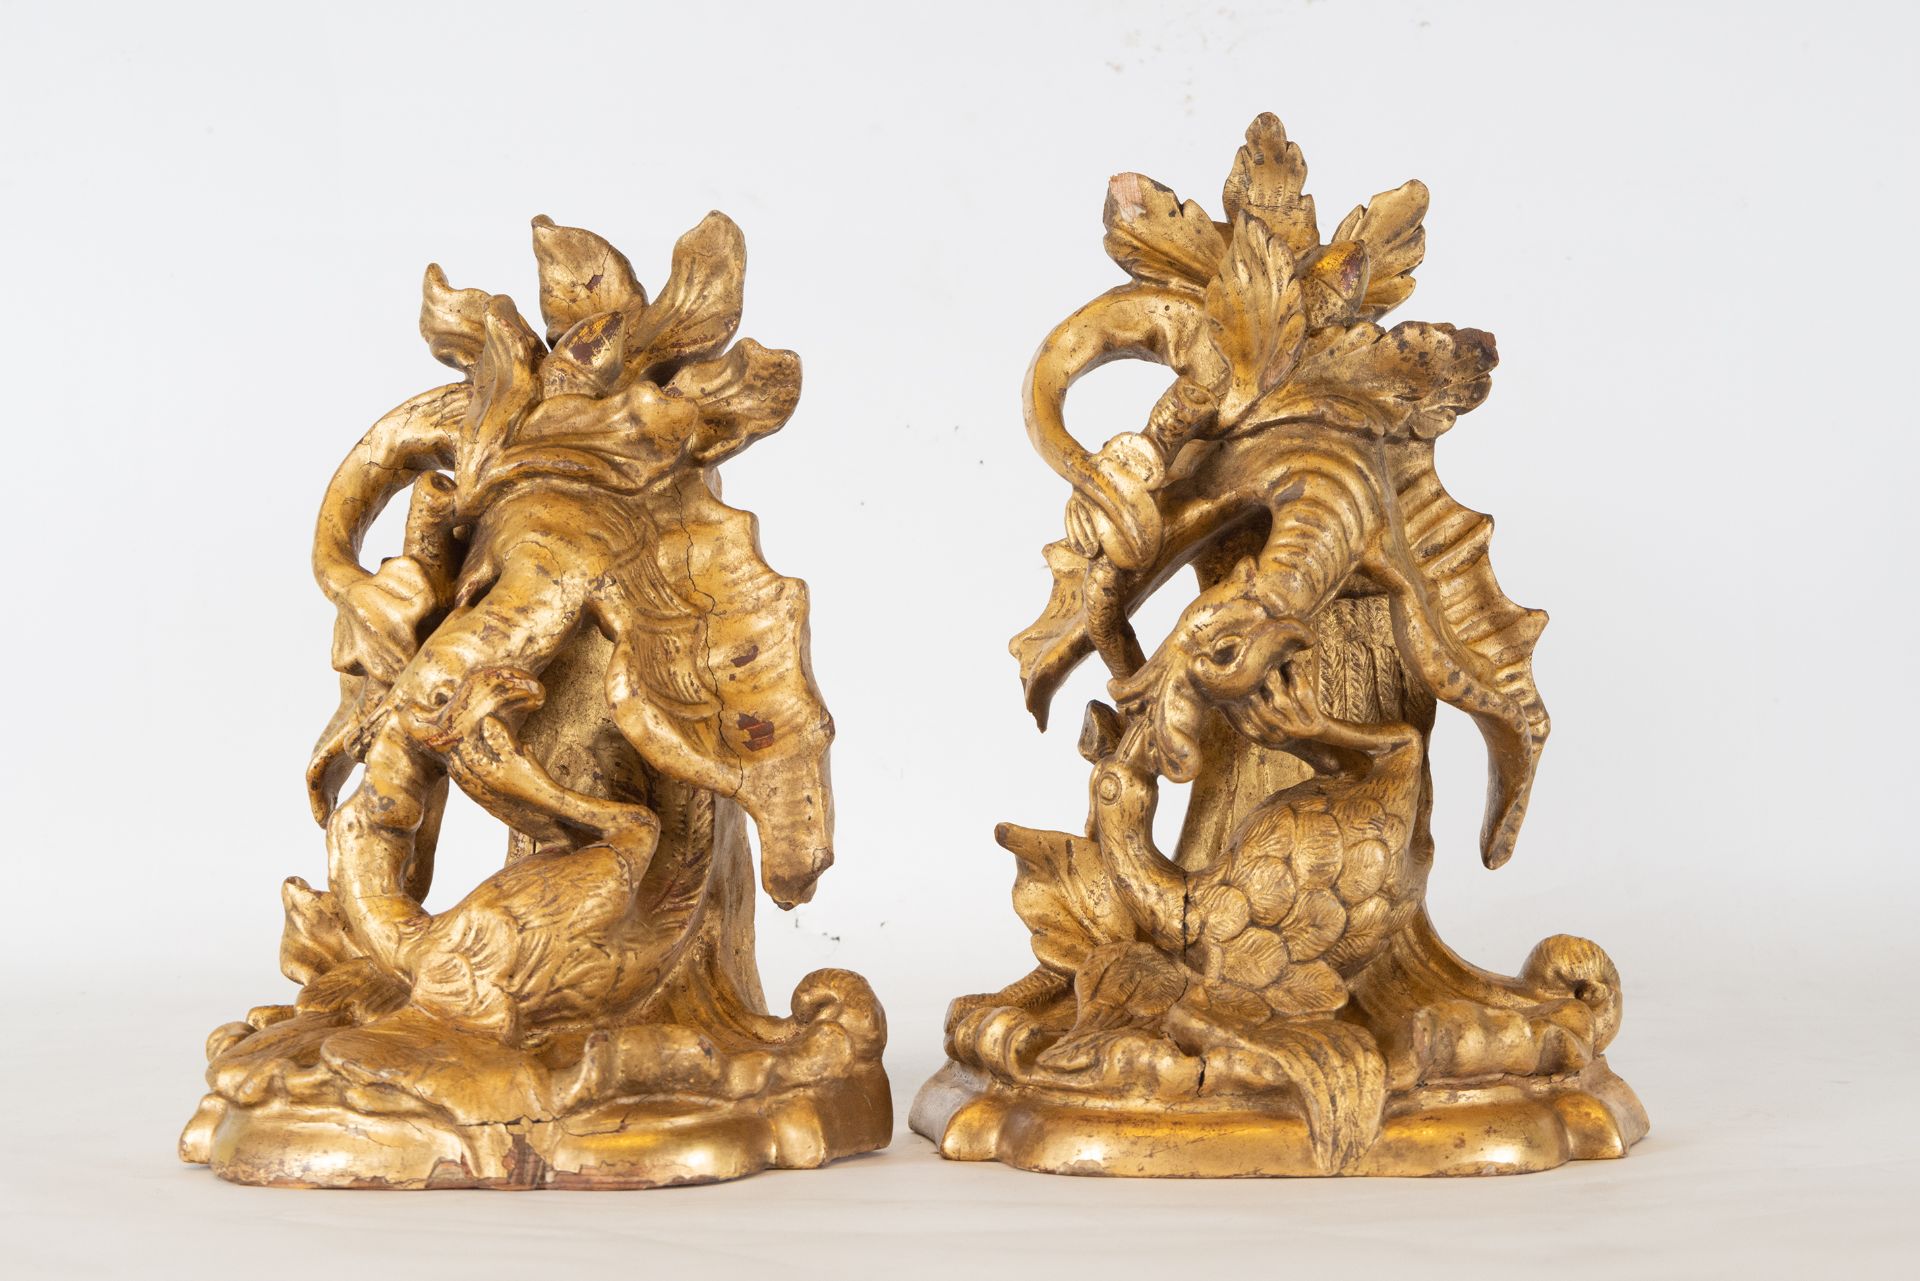 Pair of decorative Italian Rococo style Wall Corbels depicting Dragons, 18th century